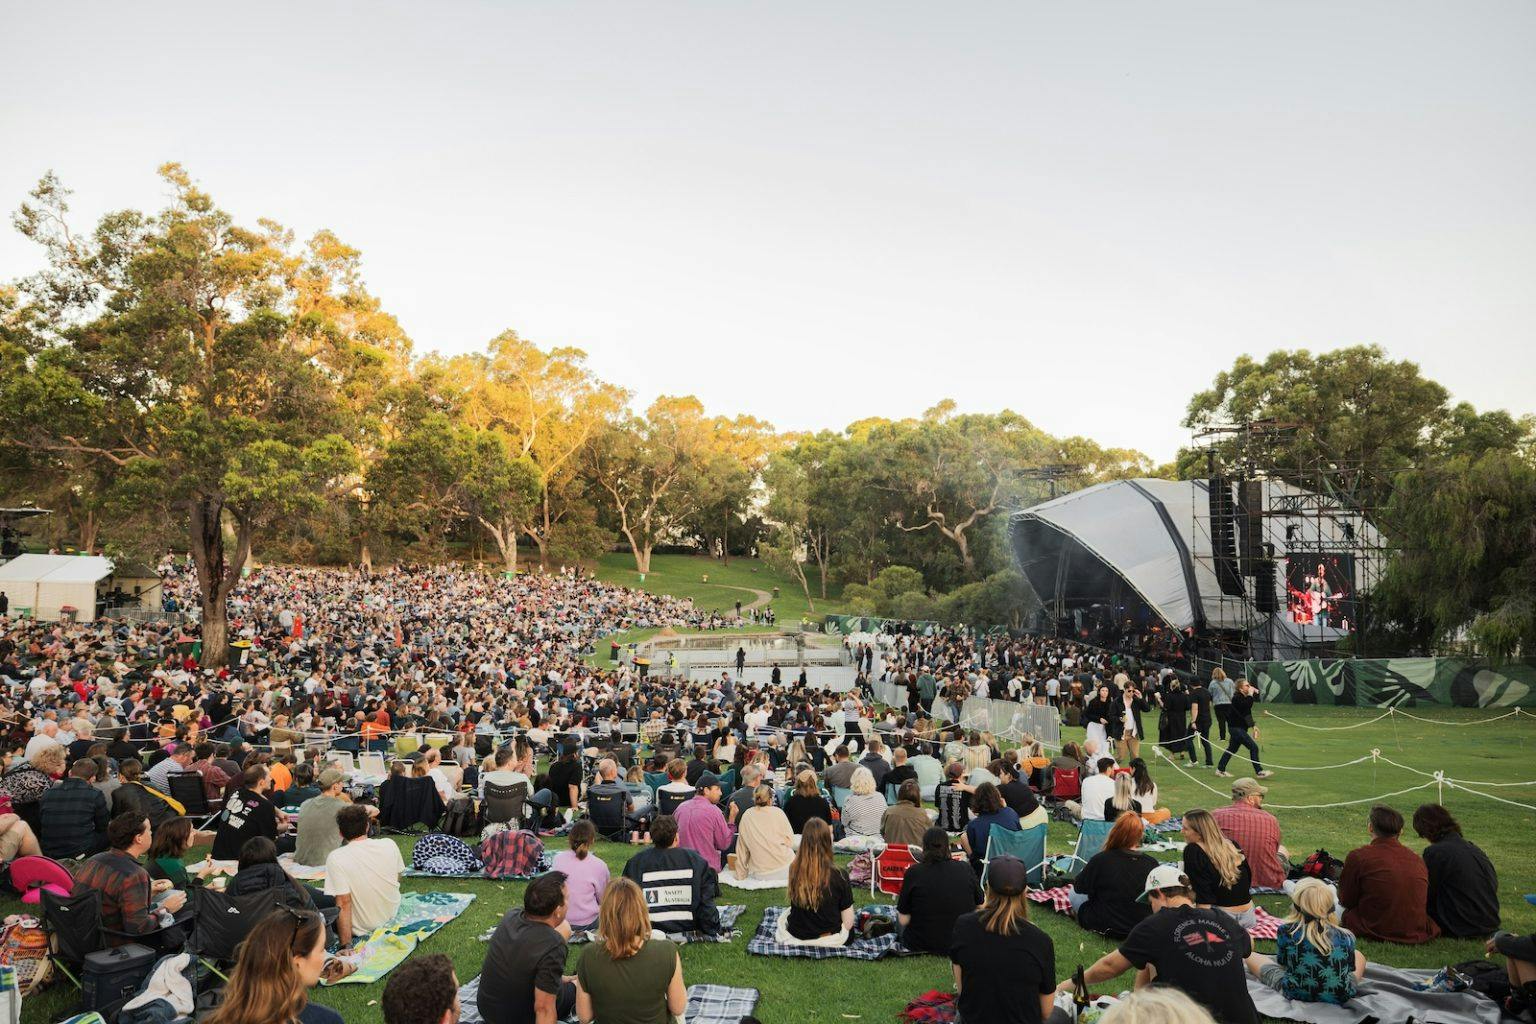 The National Kings Park live review